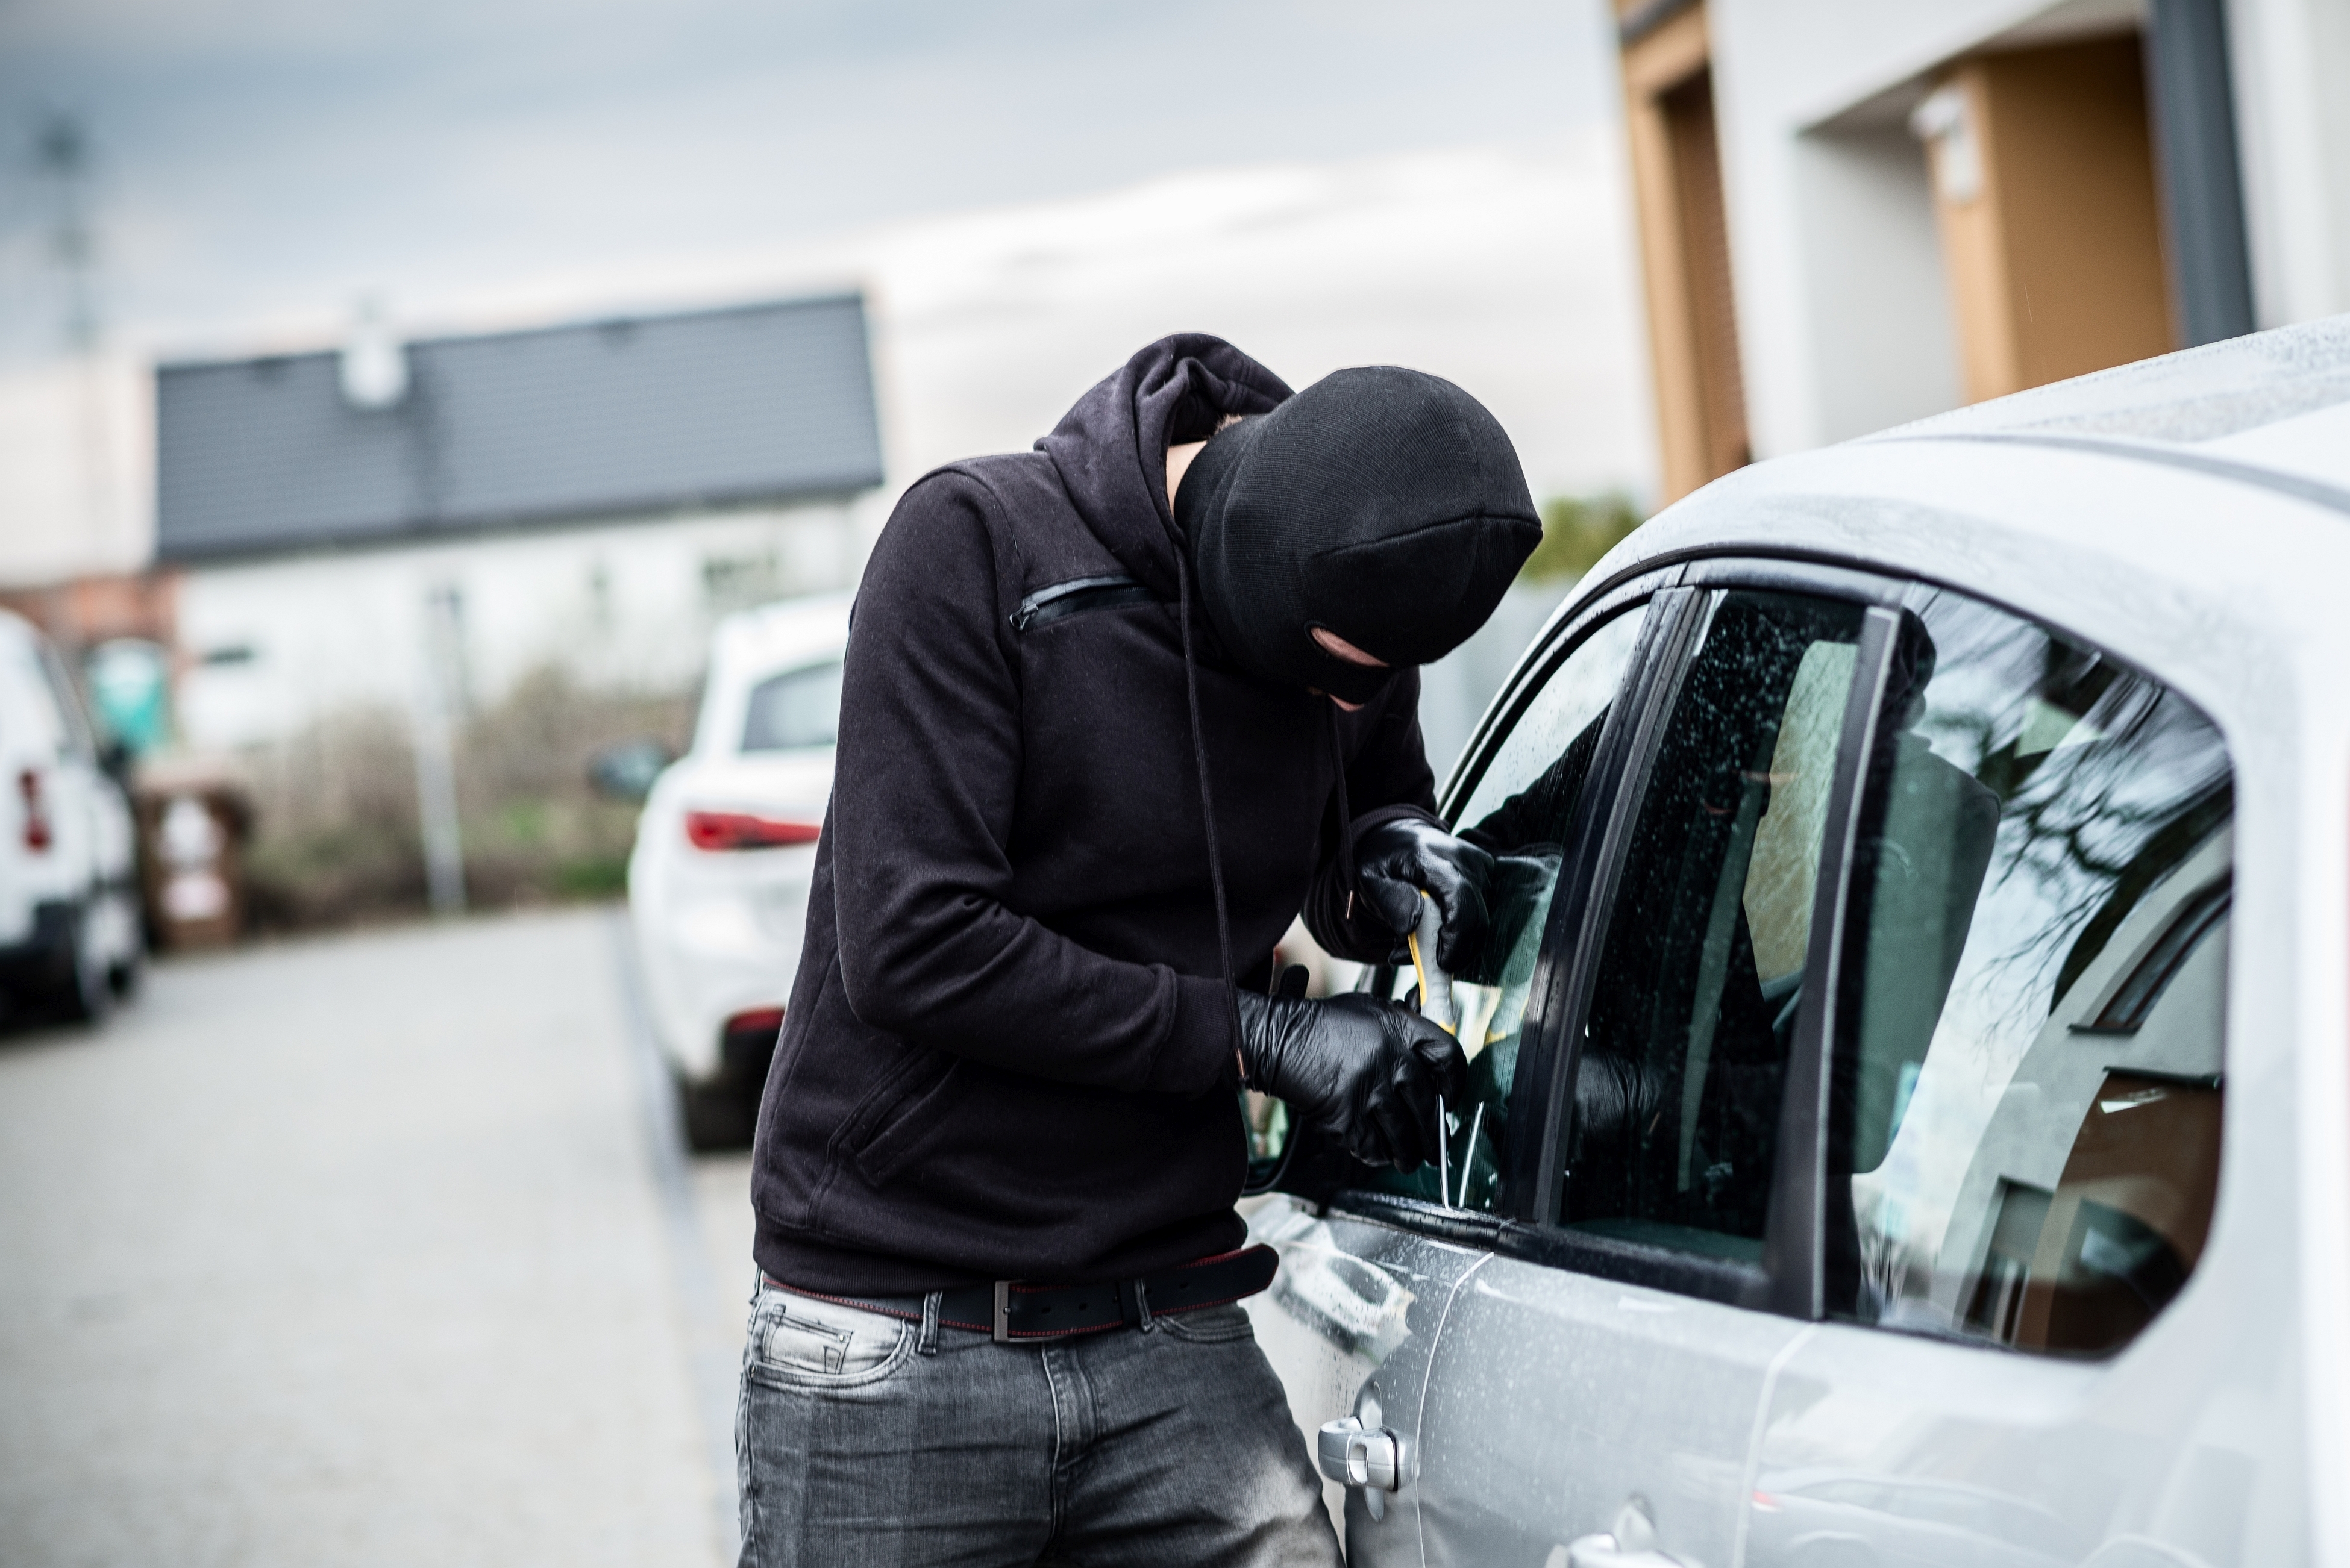 How to prevent the theft of your car